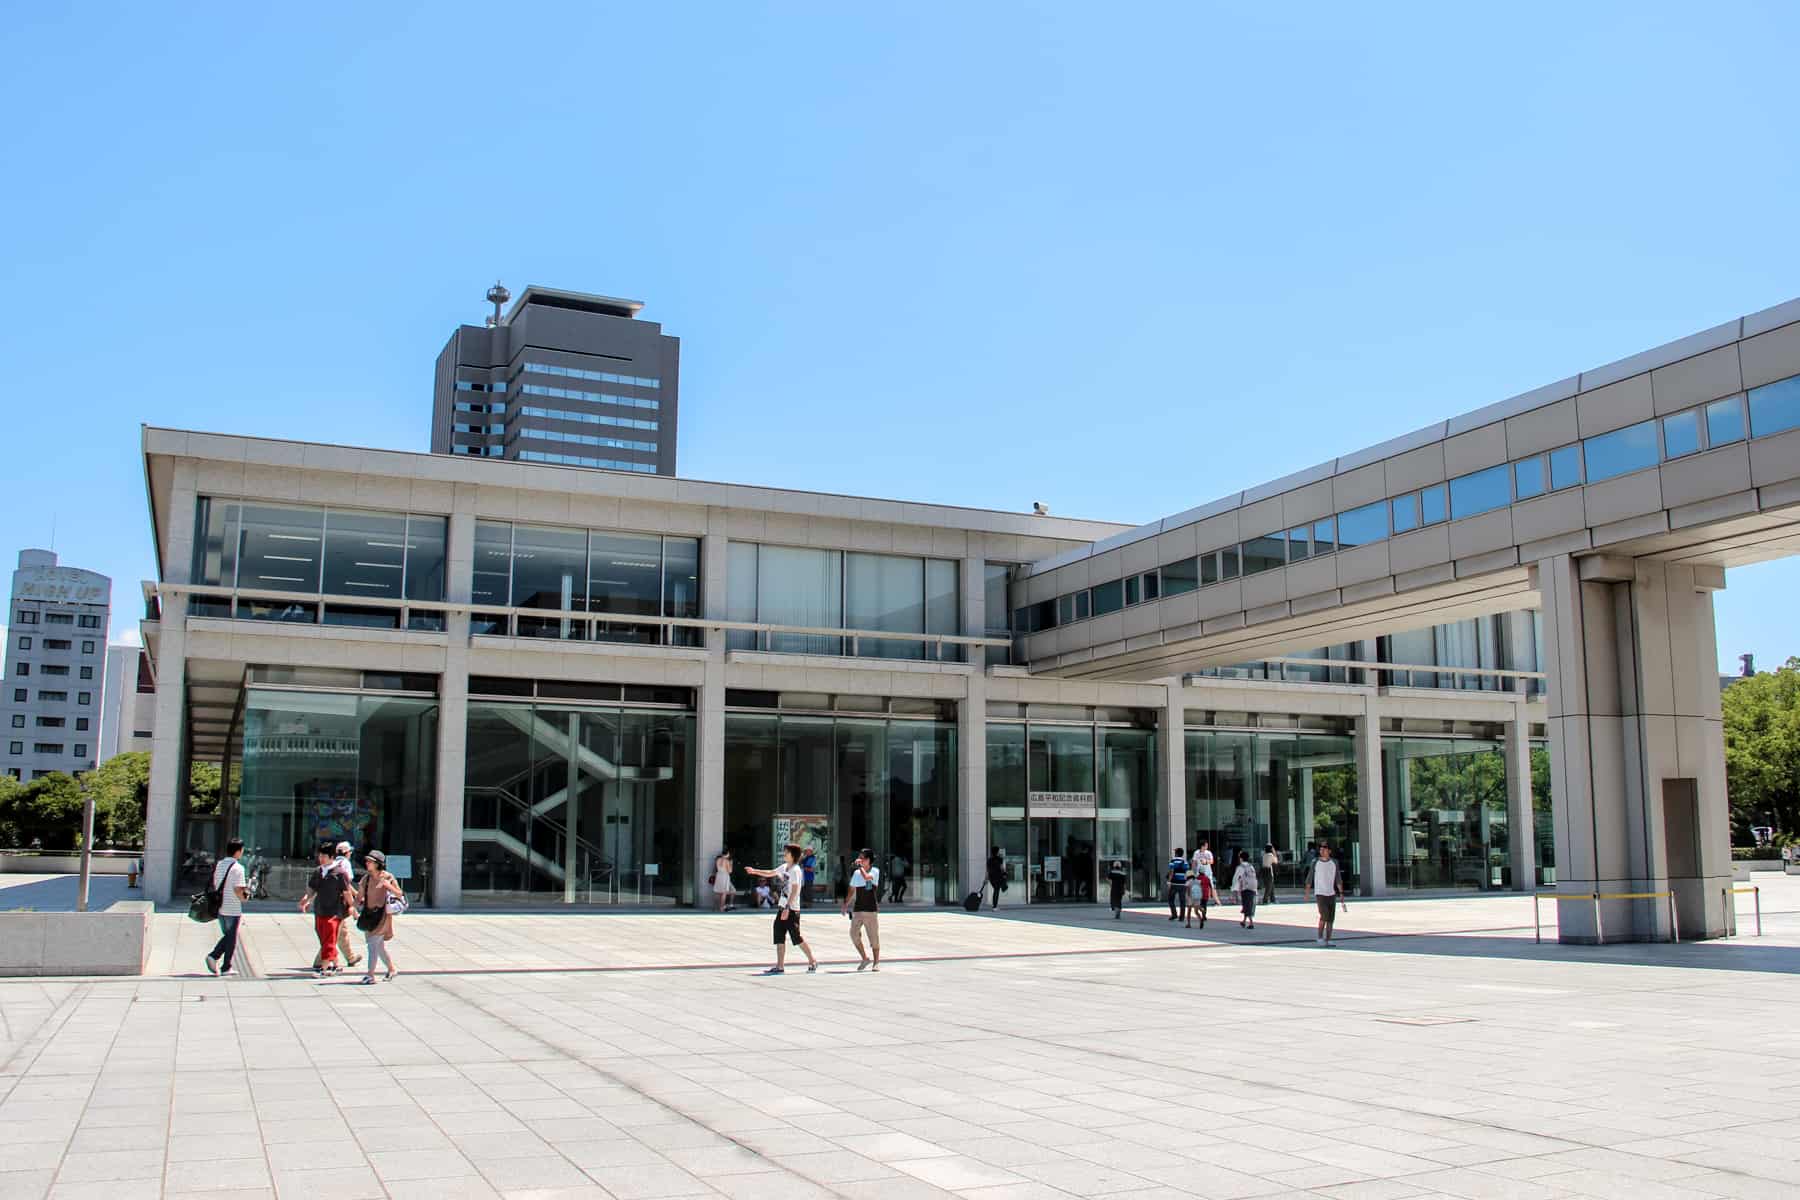 The stone and glass exterior of the Hiroshima Peace Memorial Museum.